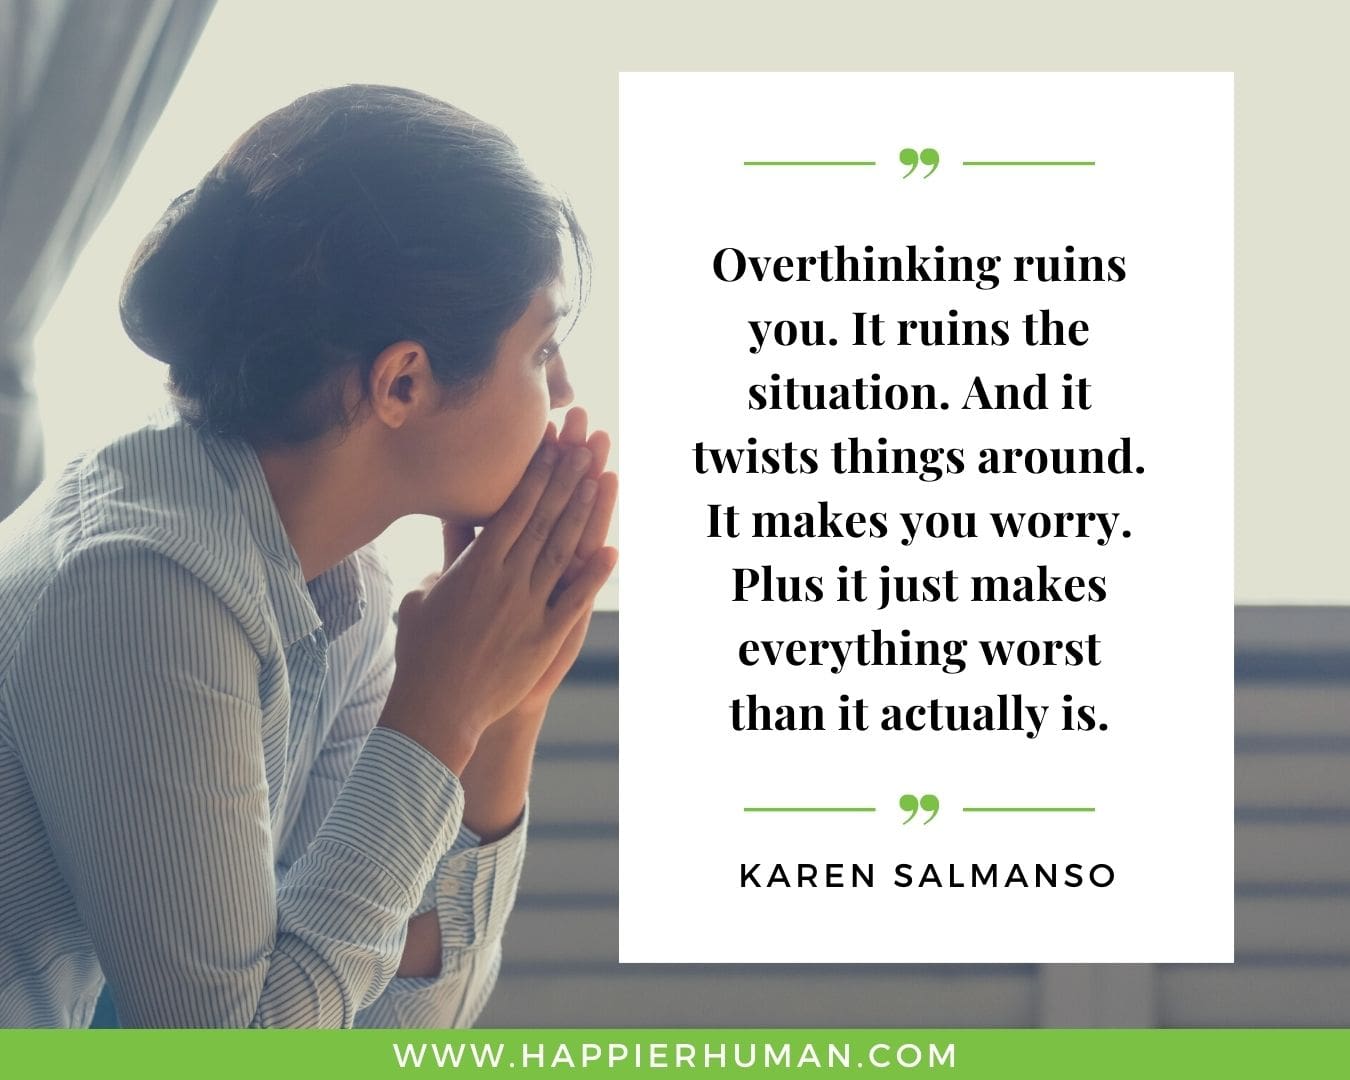 Overthinking Quotes - "Overthinking ruins you. It ruins the situation. And it twists things around. It makes you worry. Plus it just makes everything worst than it actually is.” - Karen Salmanso